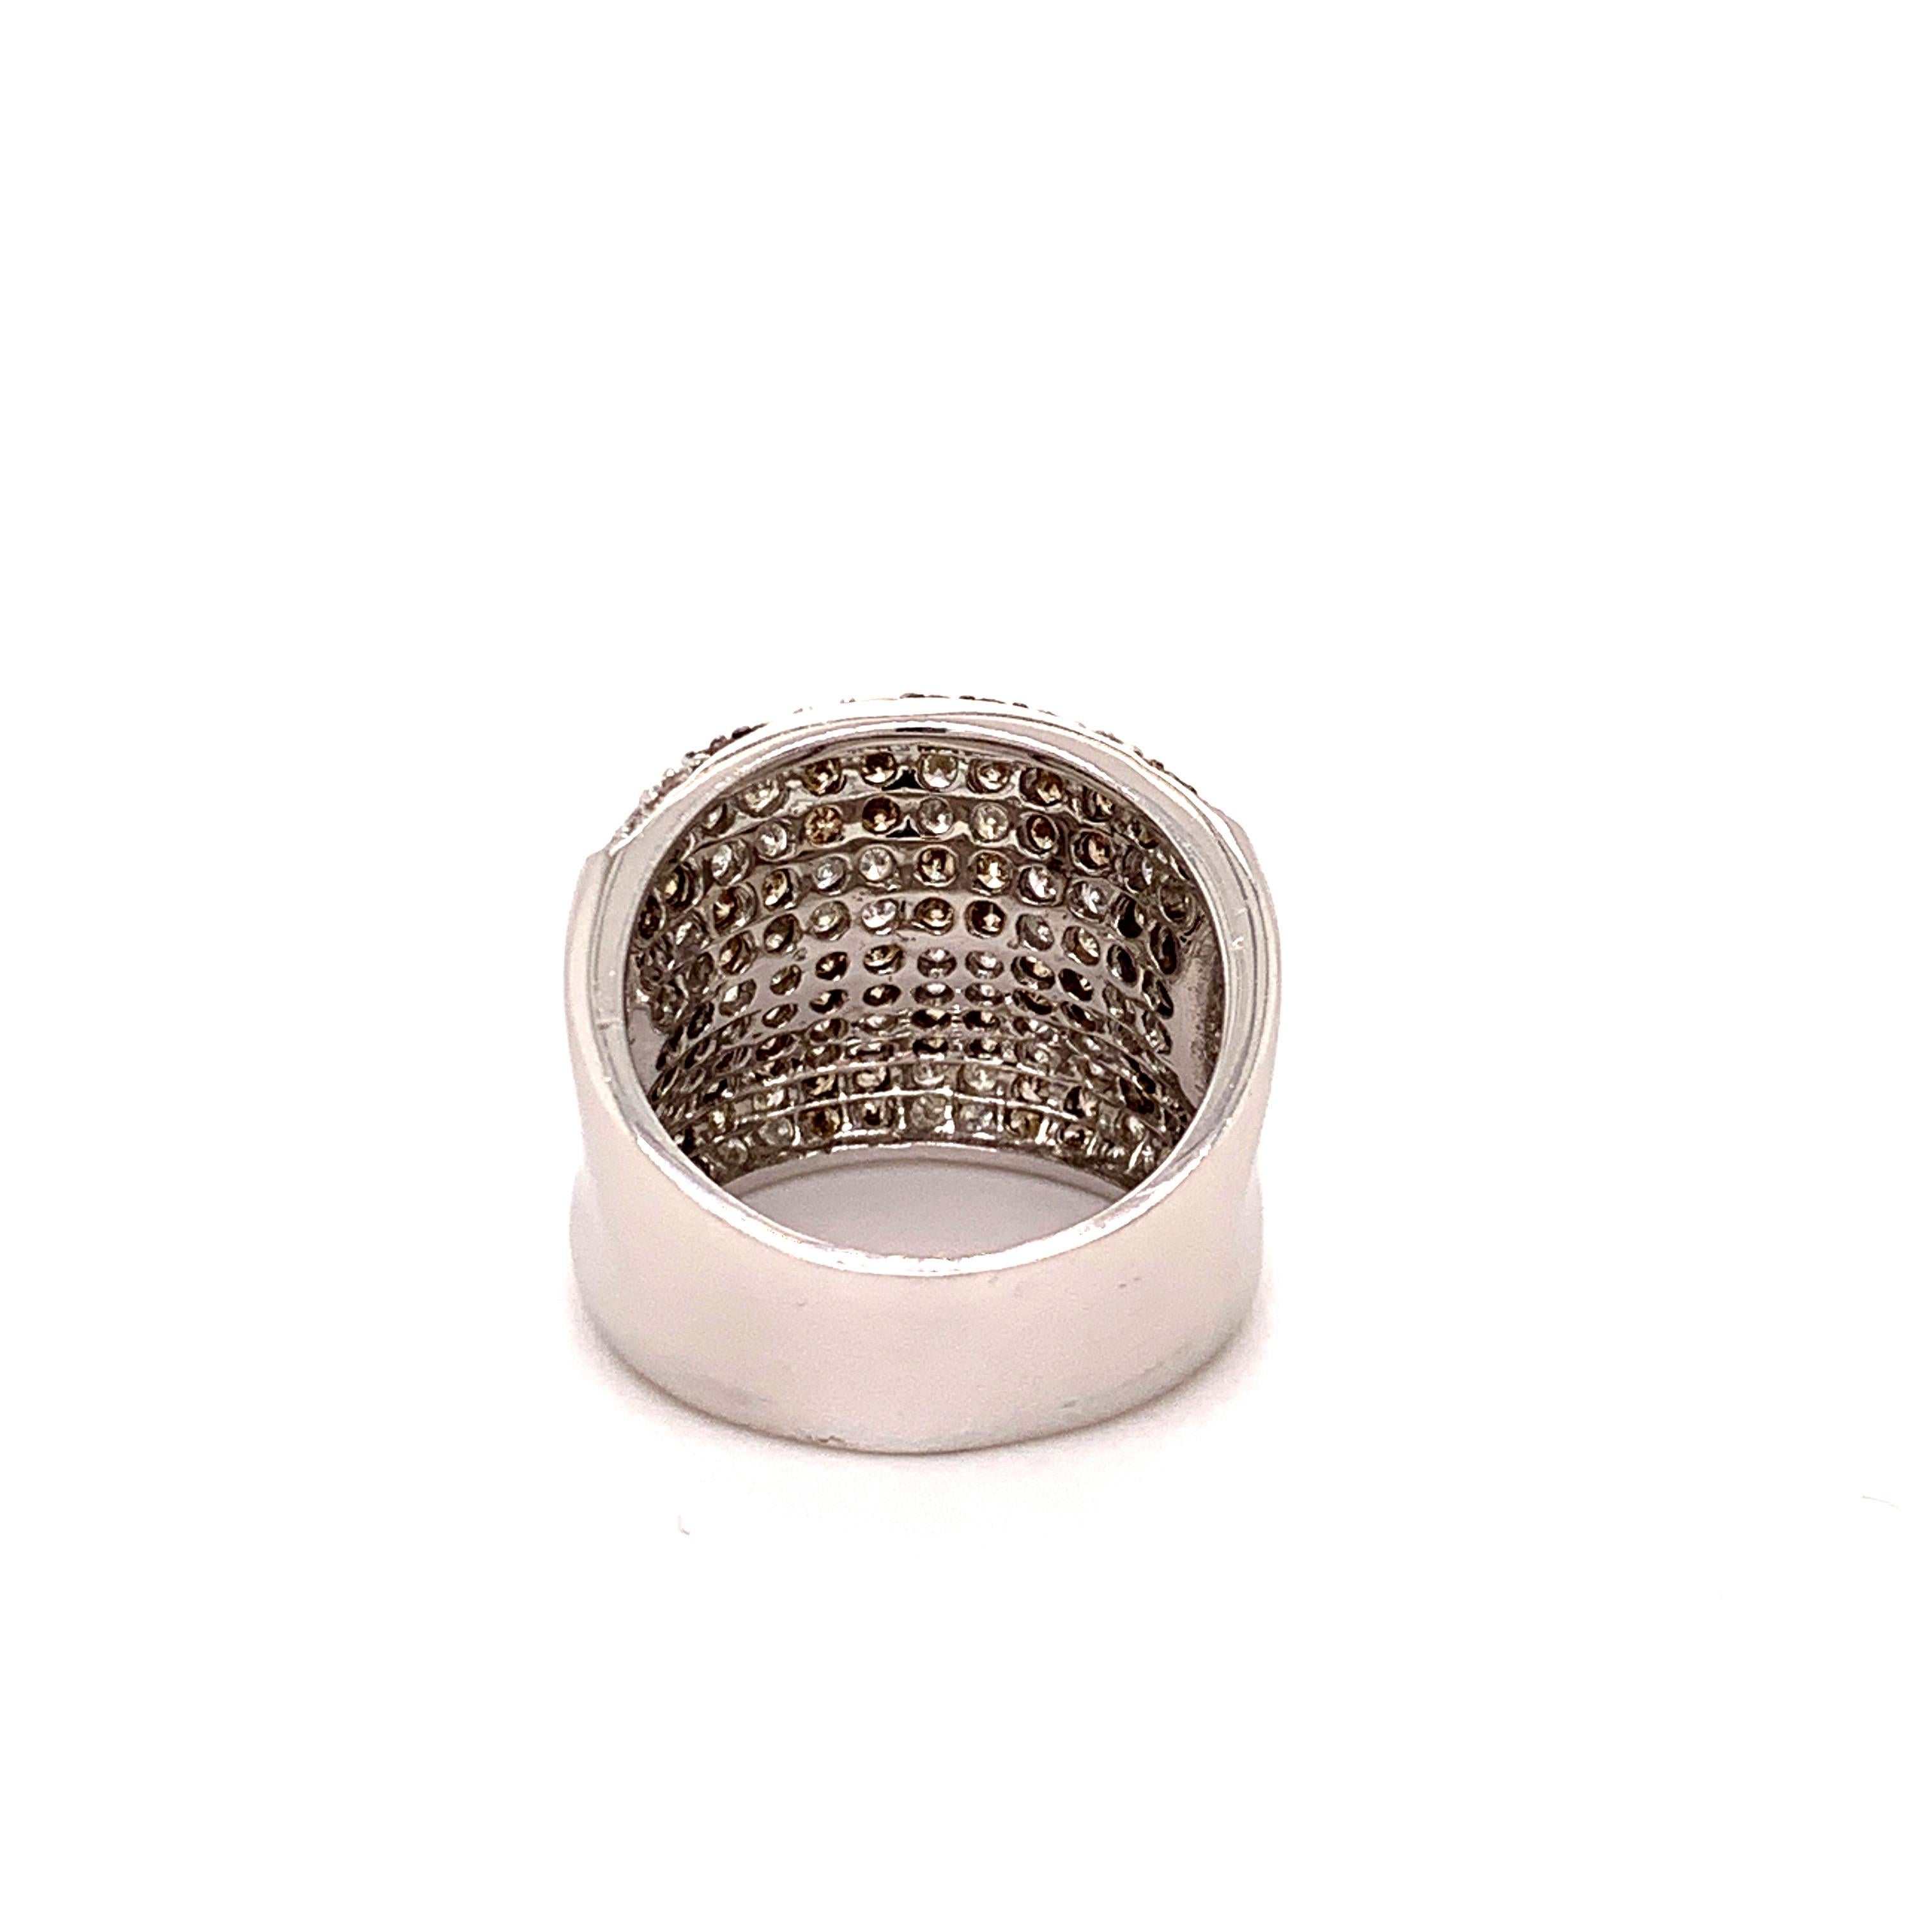 Contemporary Fancy Brown 1.21 Carat Diamond Cocktail Ring